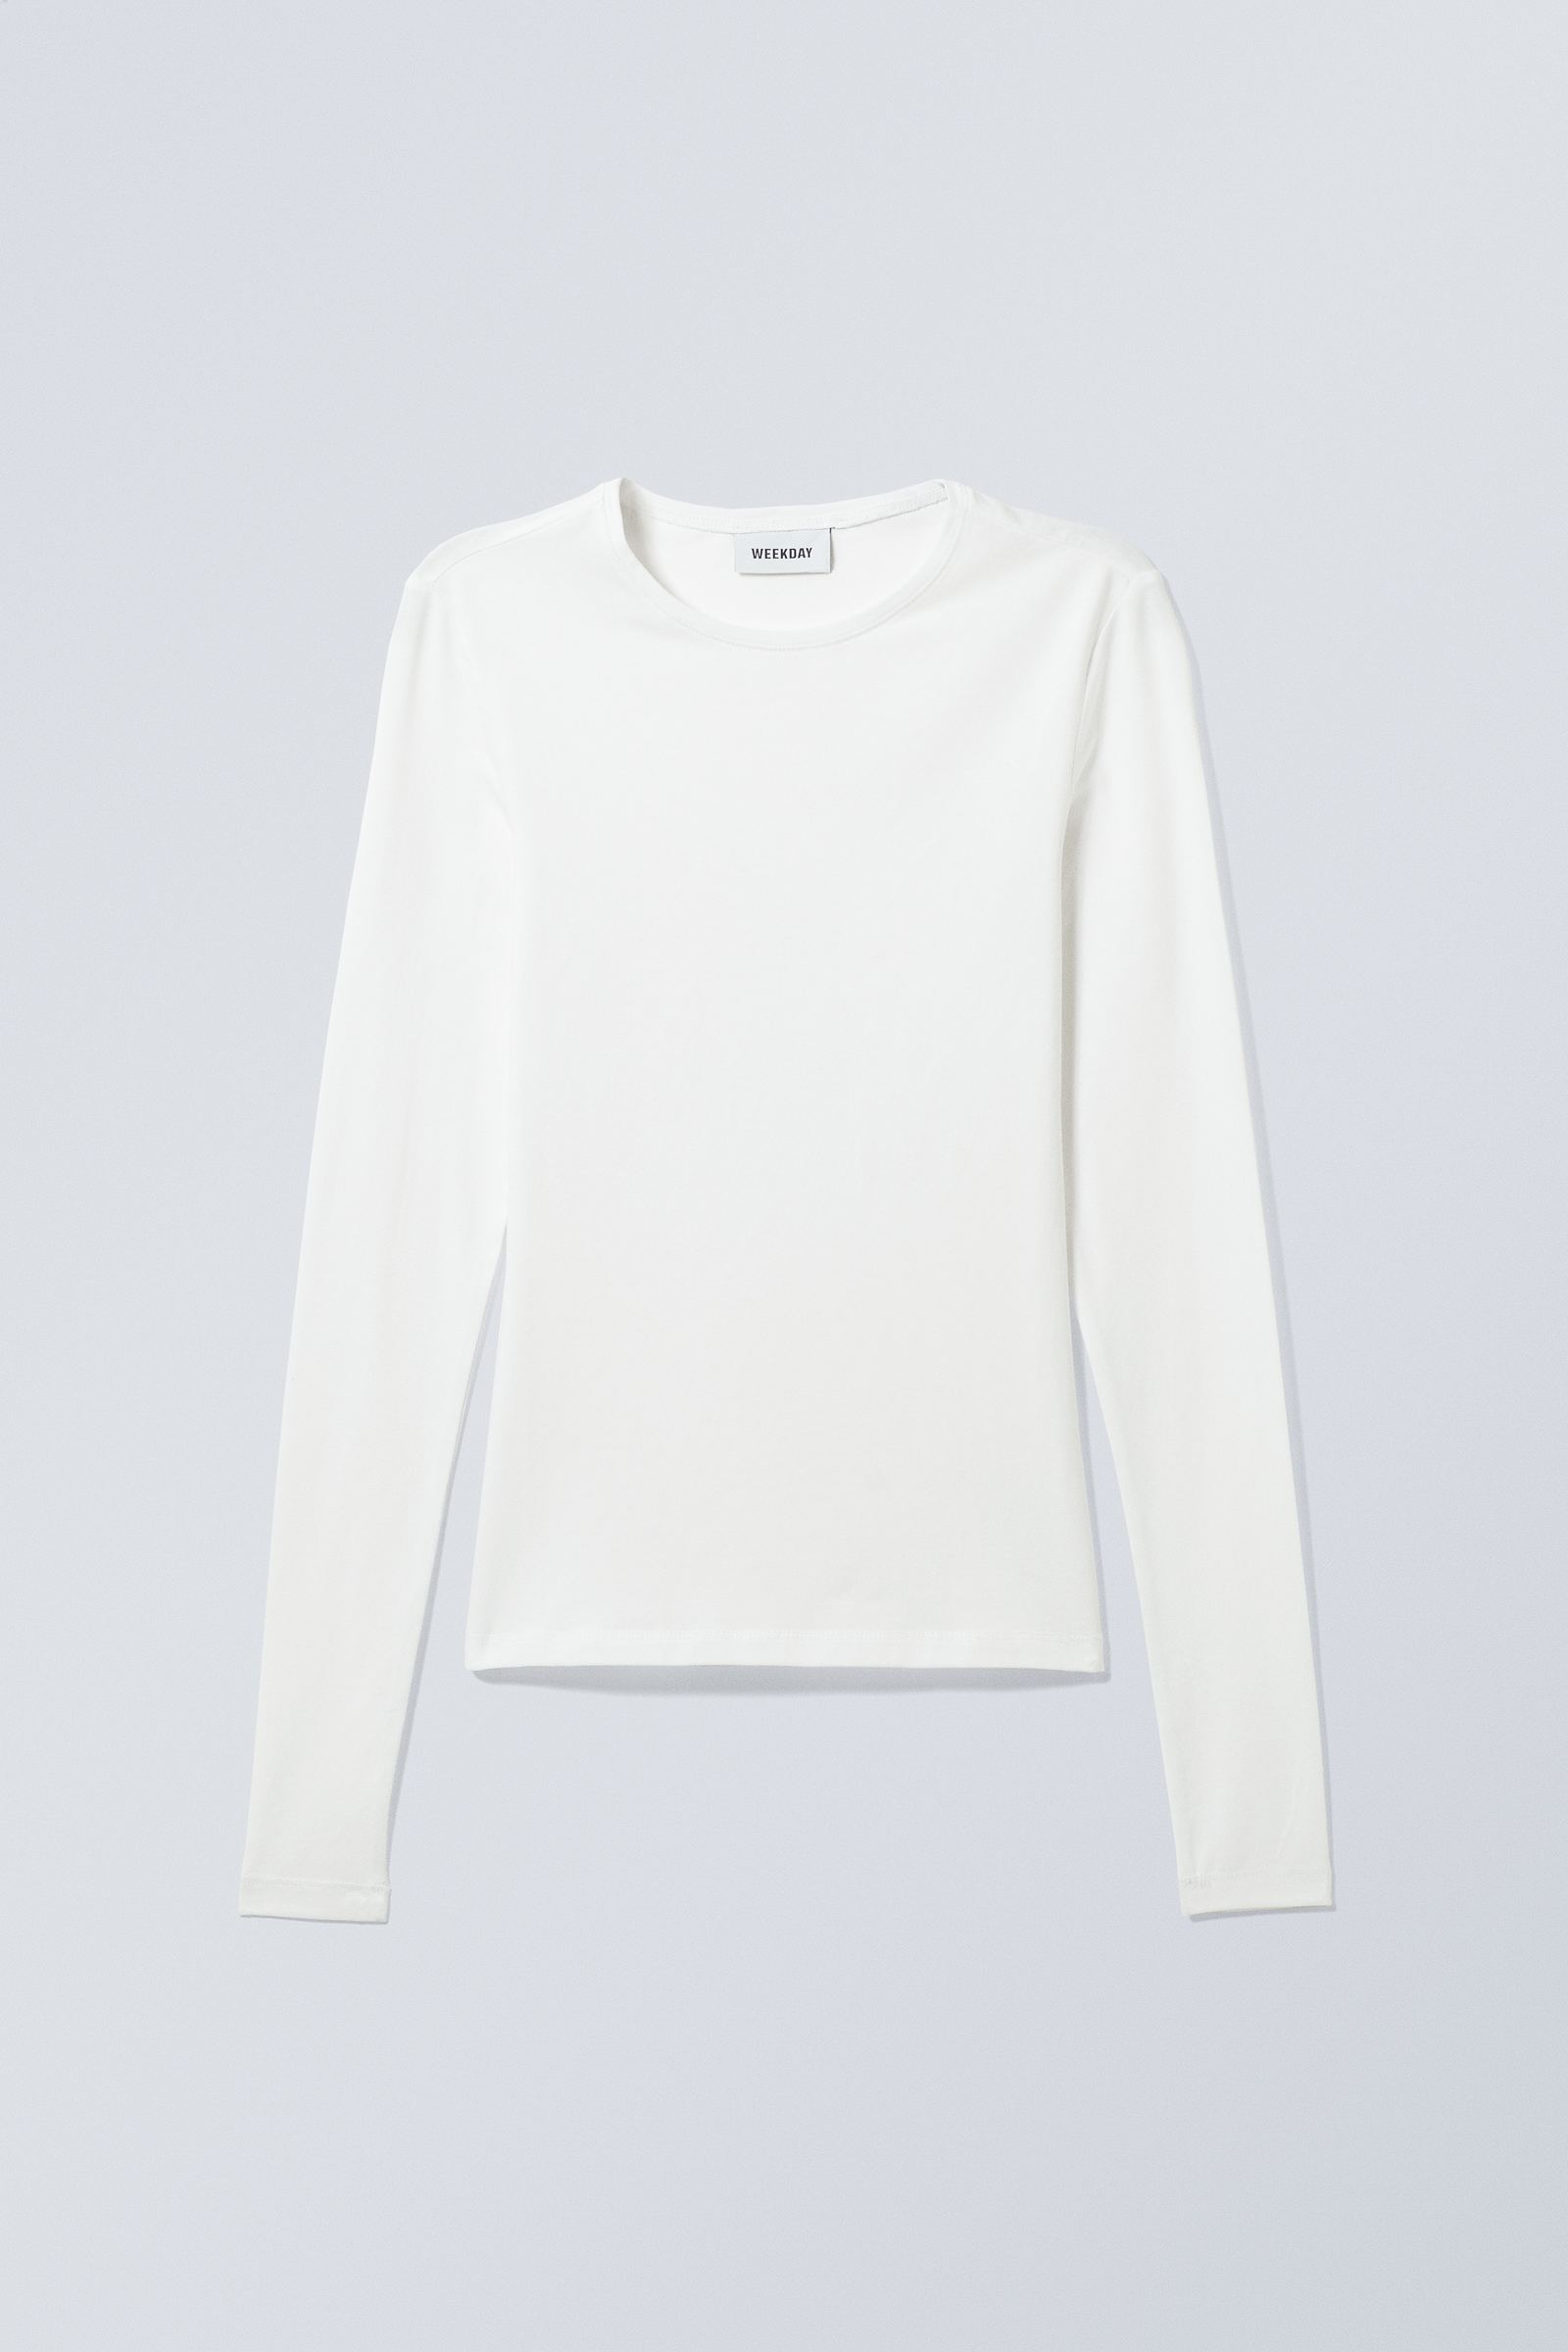 White - Slim Fitted Long Sleeve - 3